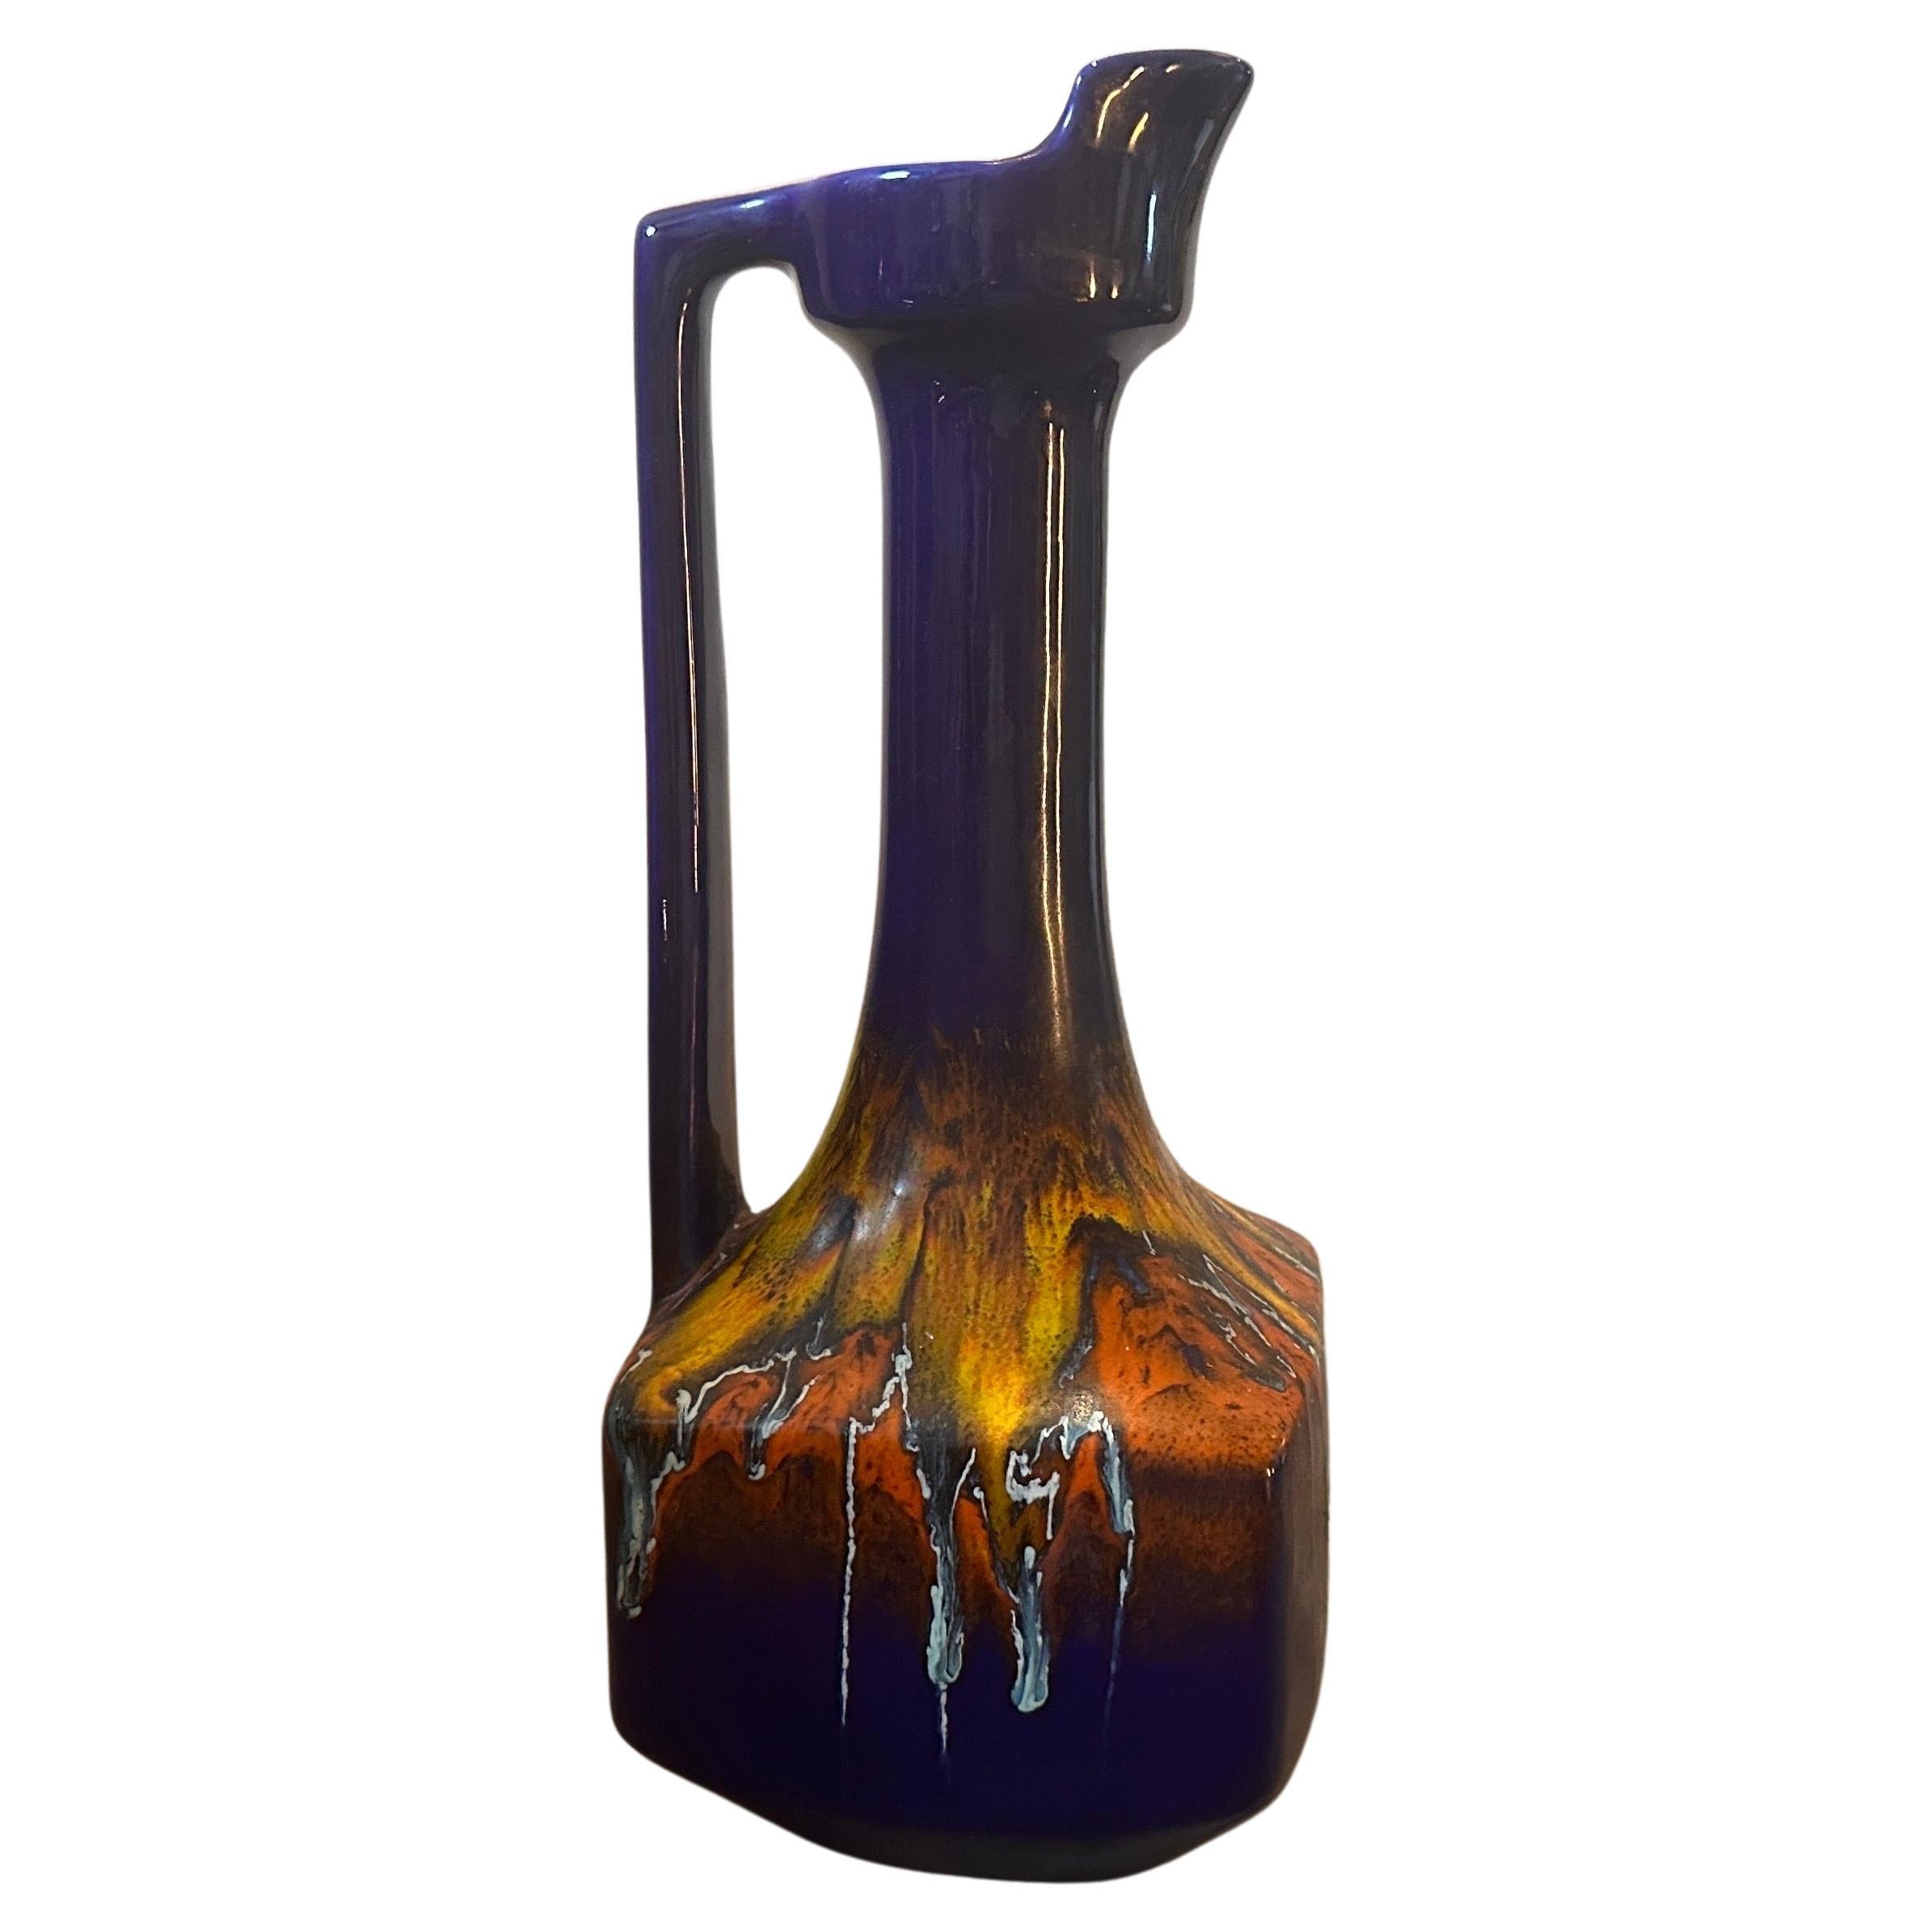 This Jug Vase designed and manufactured by Bertoncello is a visually captivating and historically significant piece of art and design. Its unique combination of form, colors, and craftsmanship encapsulates the spirit of mid-century modernism and